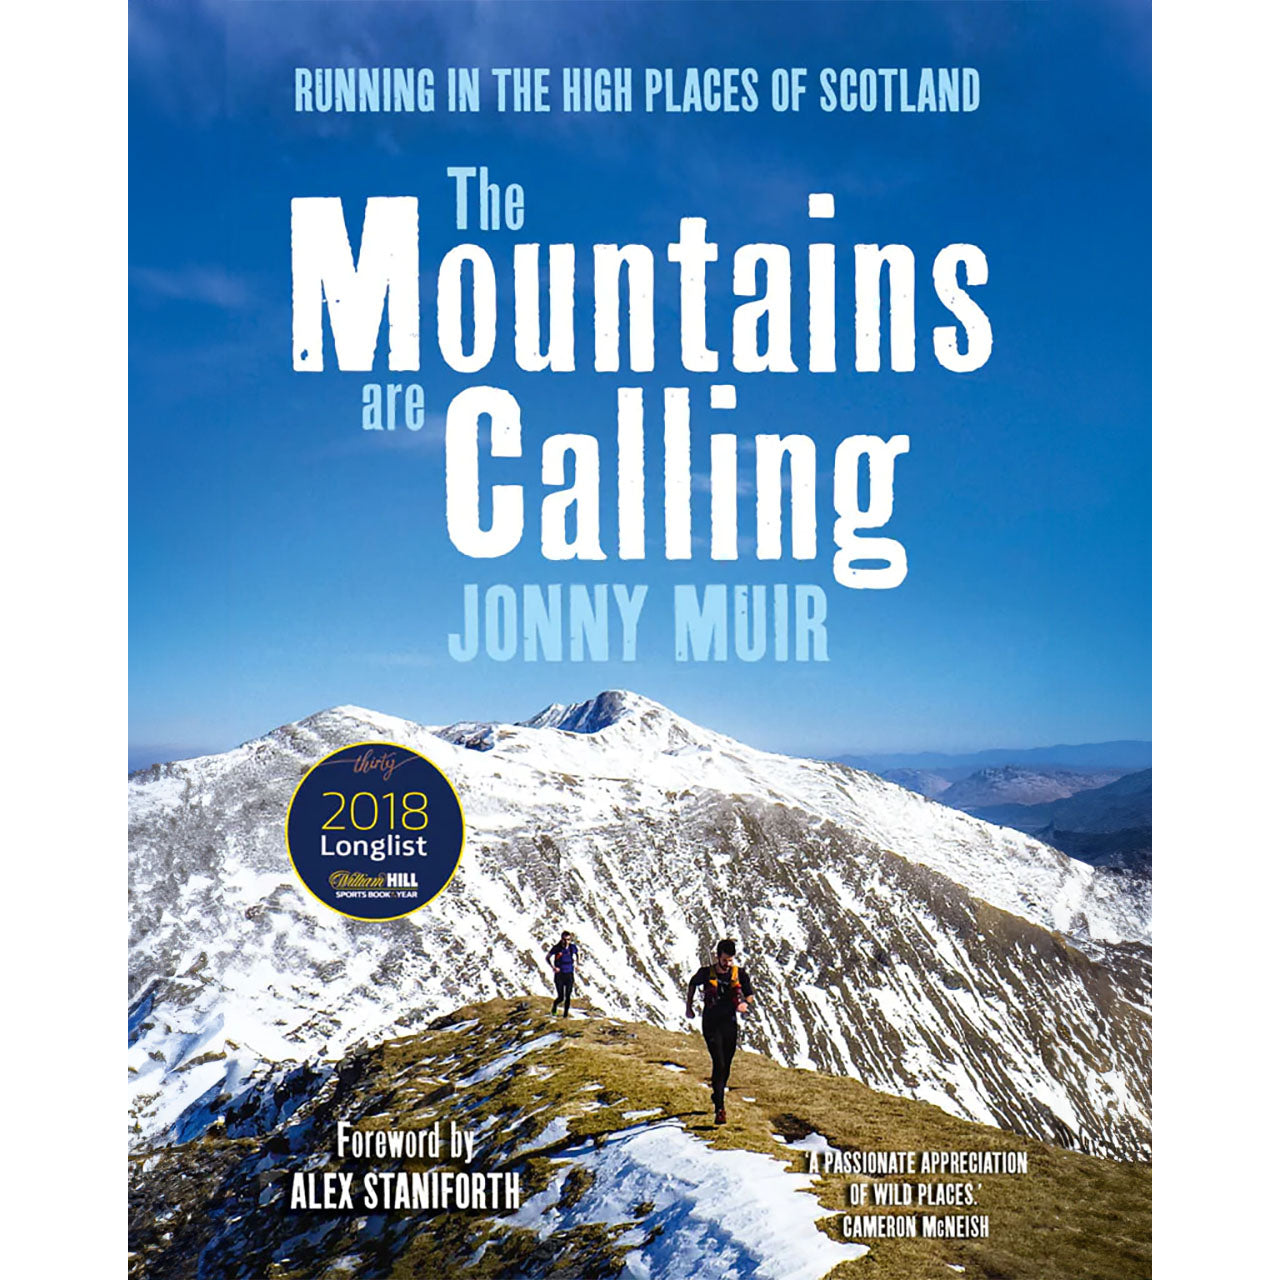 The Mountains Are Calling by Jonny Muir